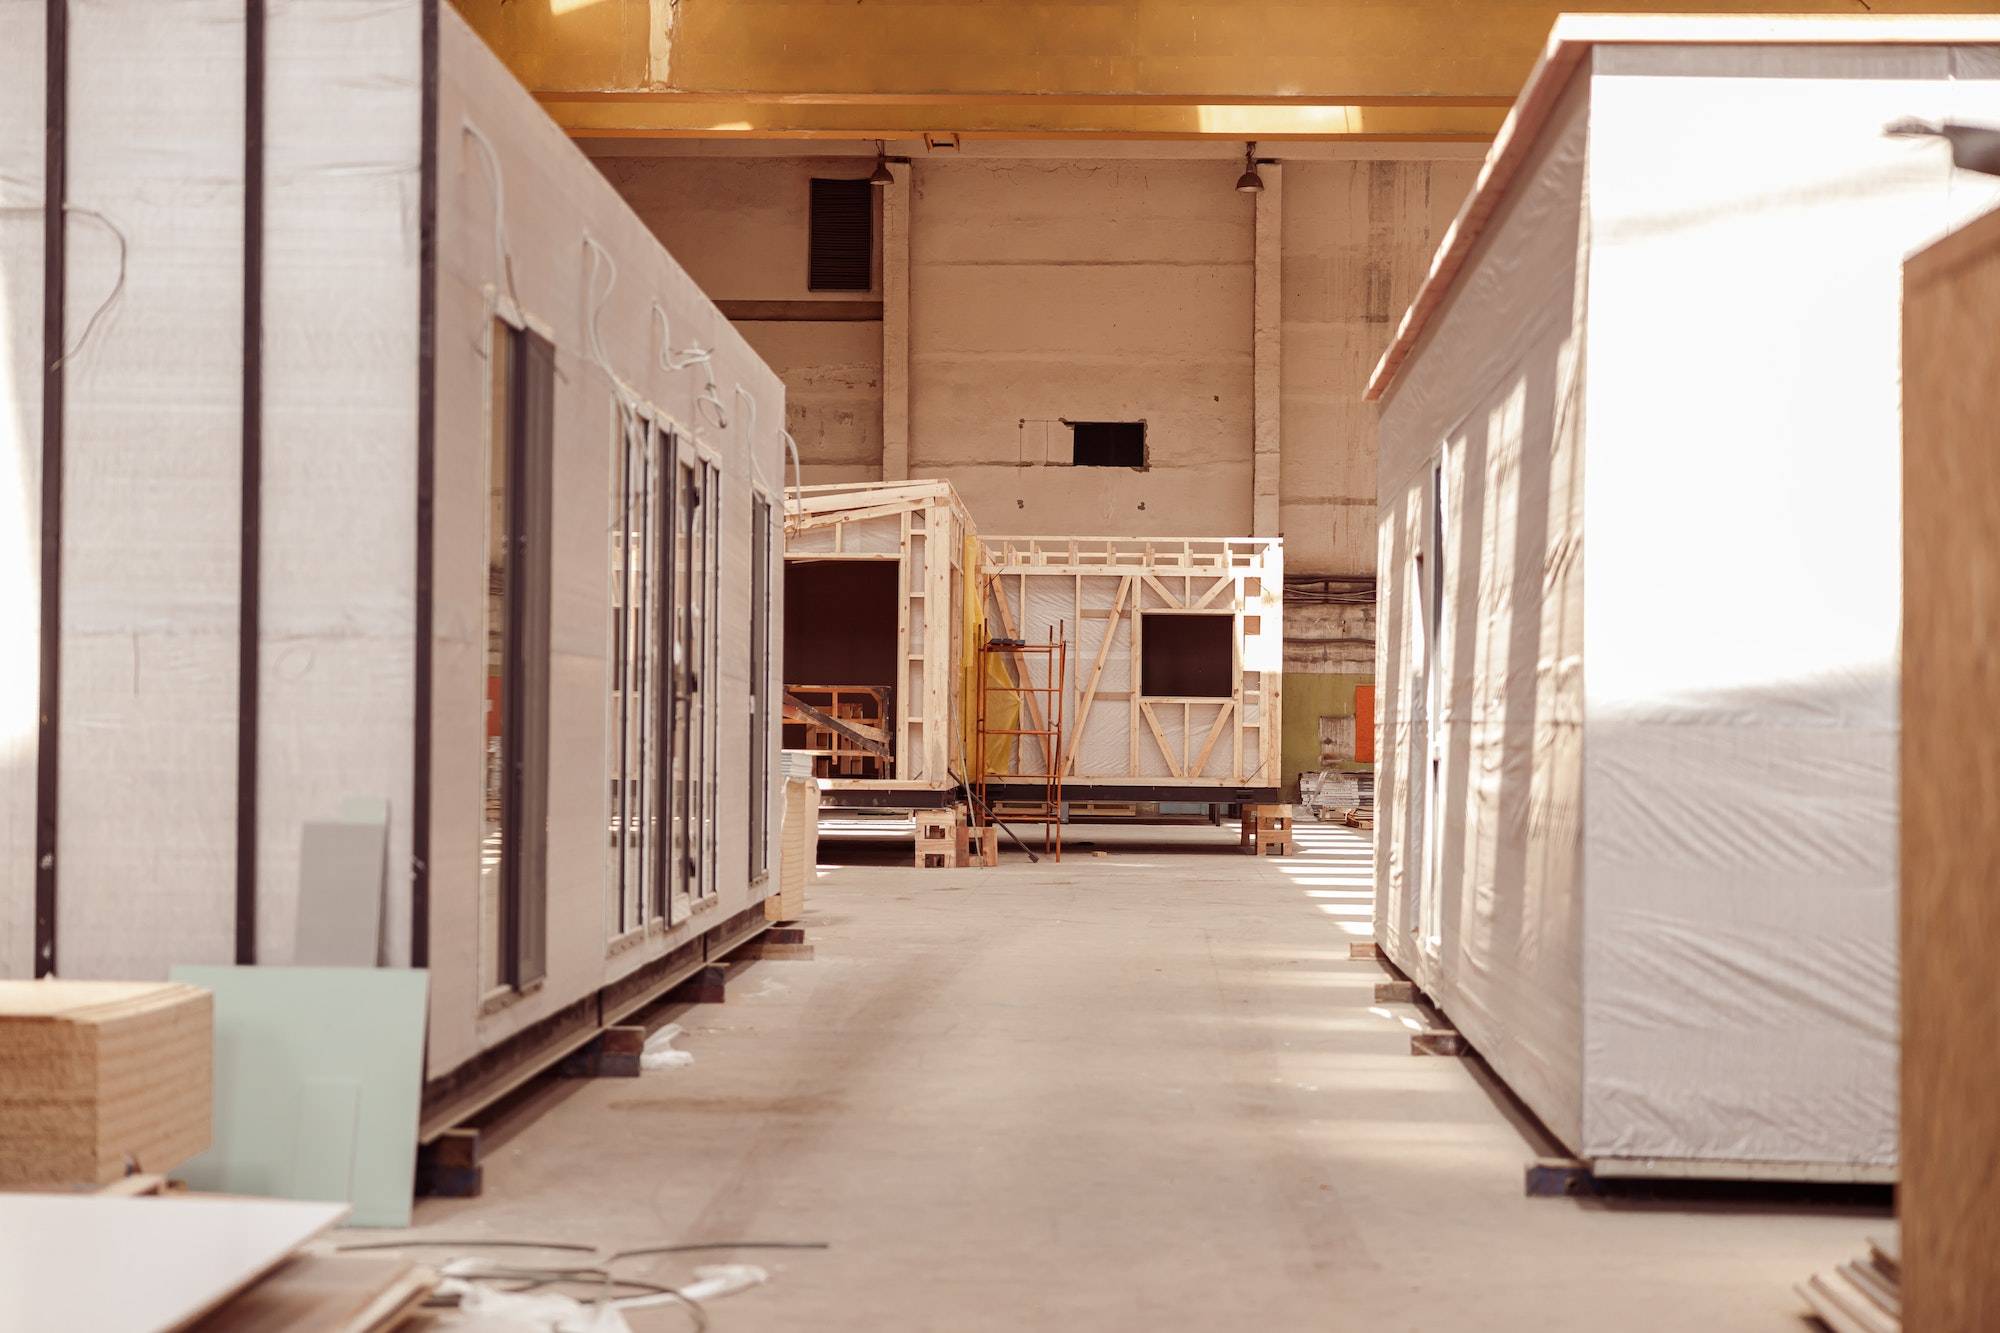 Prefabricated container houses in building under construction